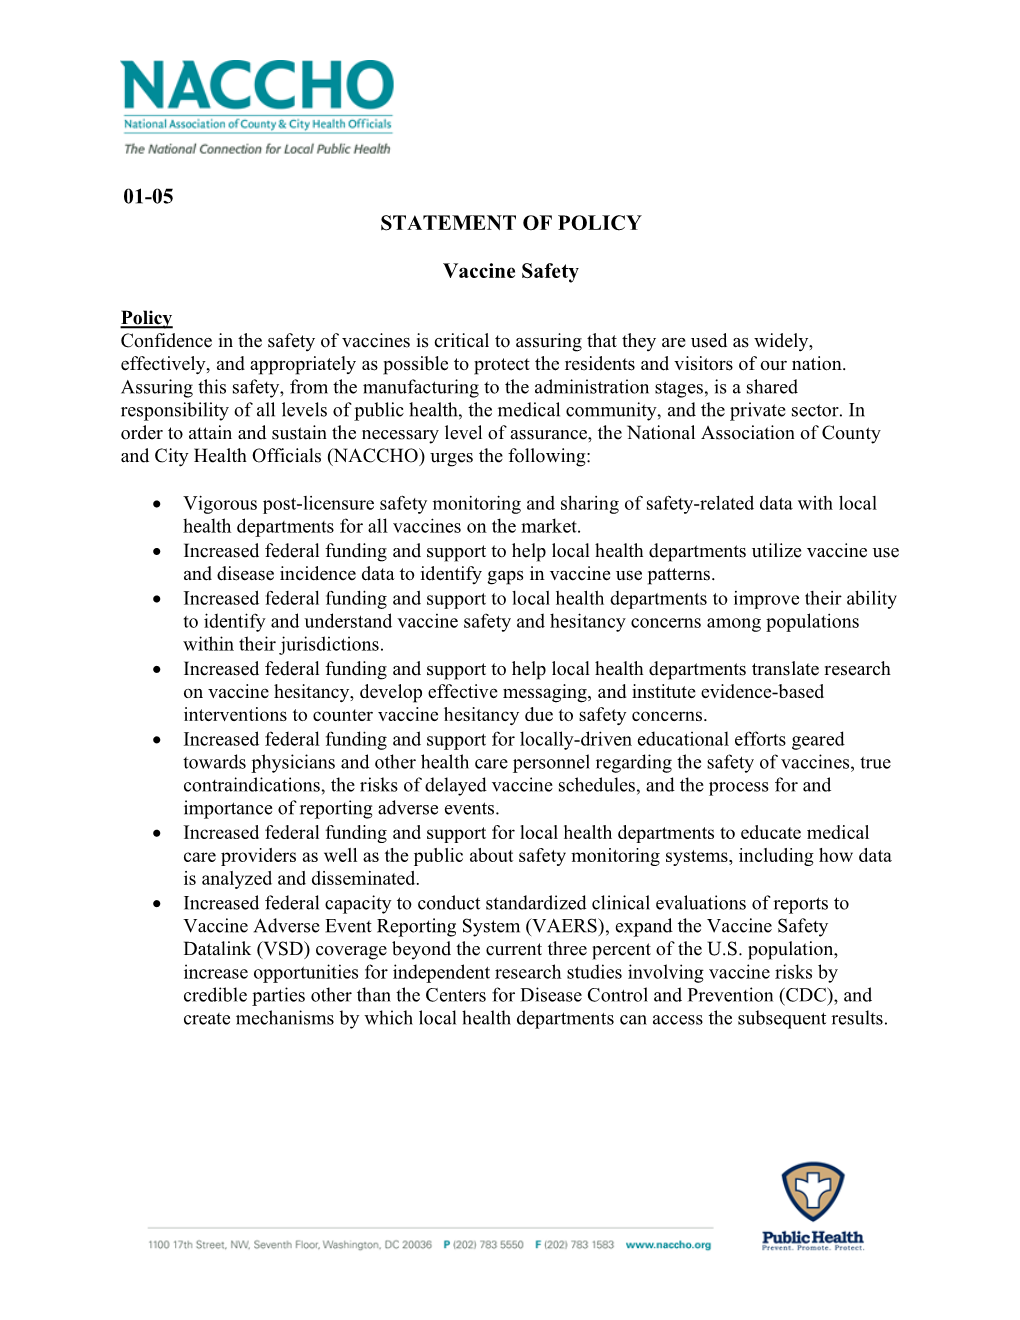 01-05 STATEMENT of POLICY Vaccine Safety